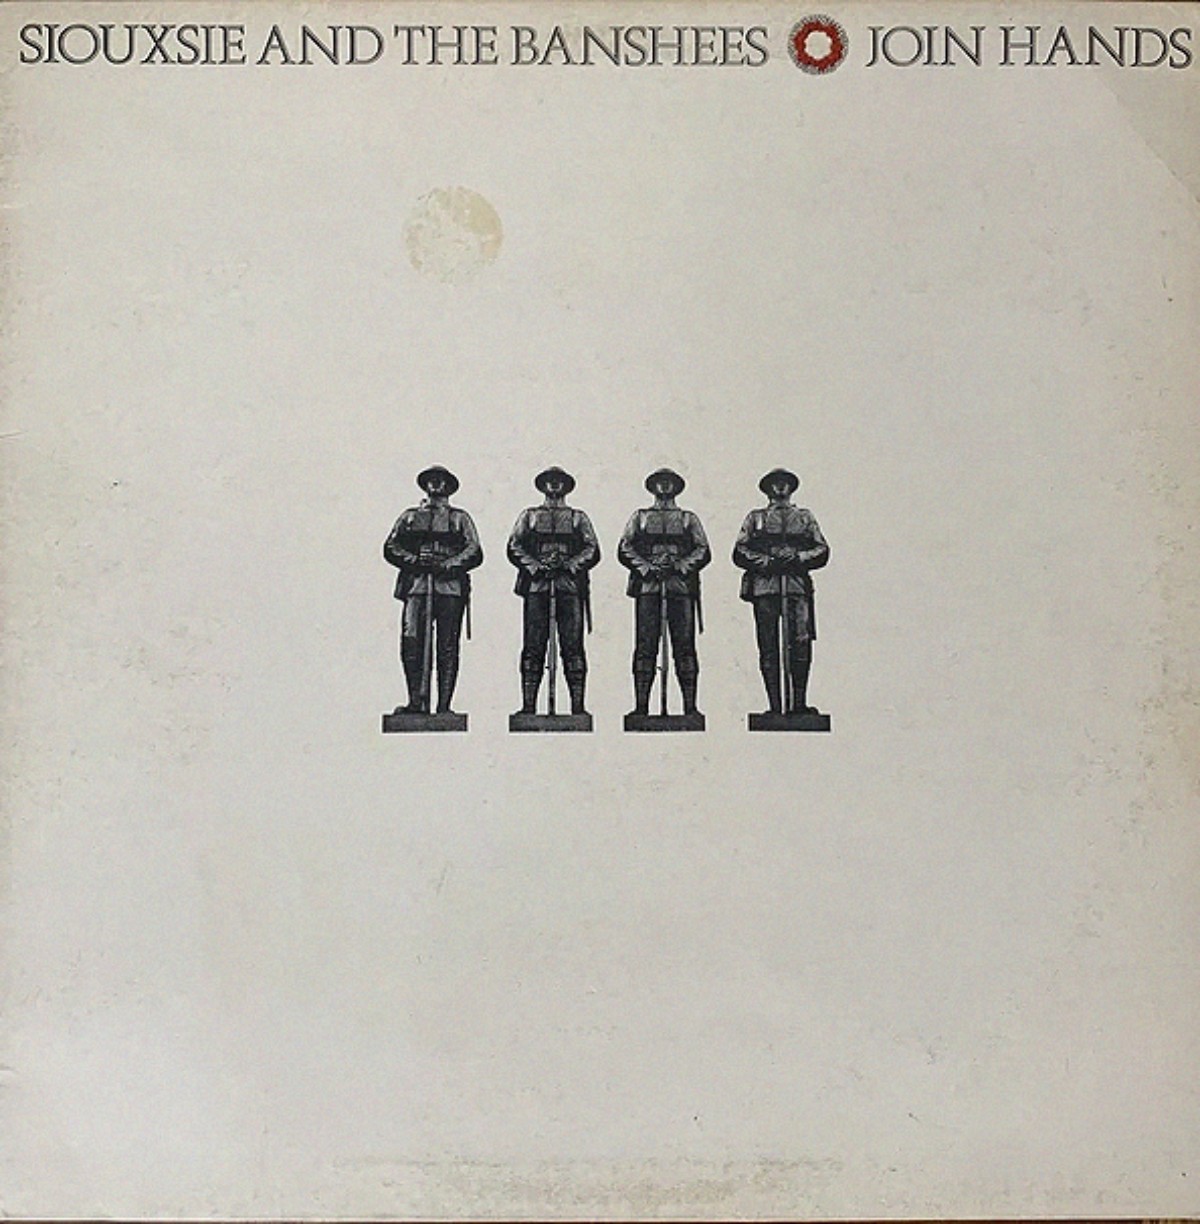 Siouxsie And The Banshees, альбом «Join Hands» (1979)